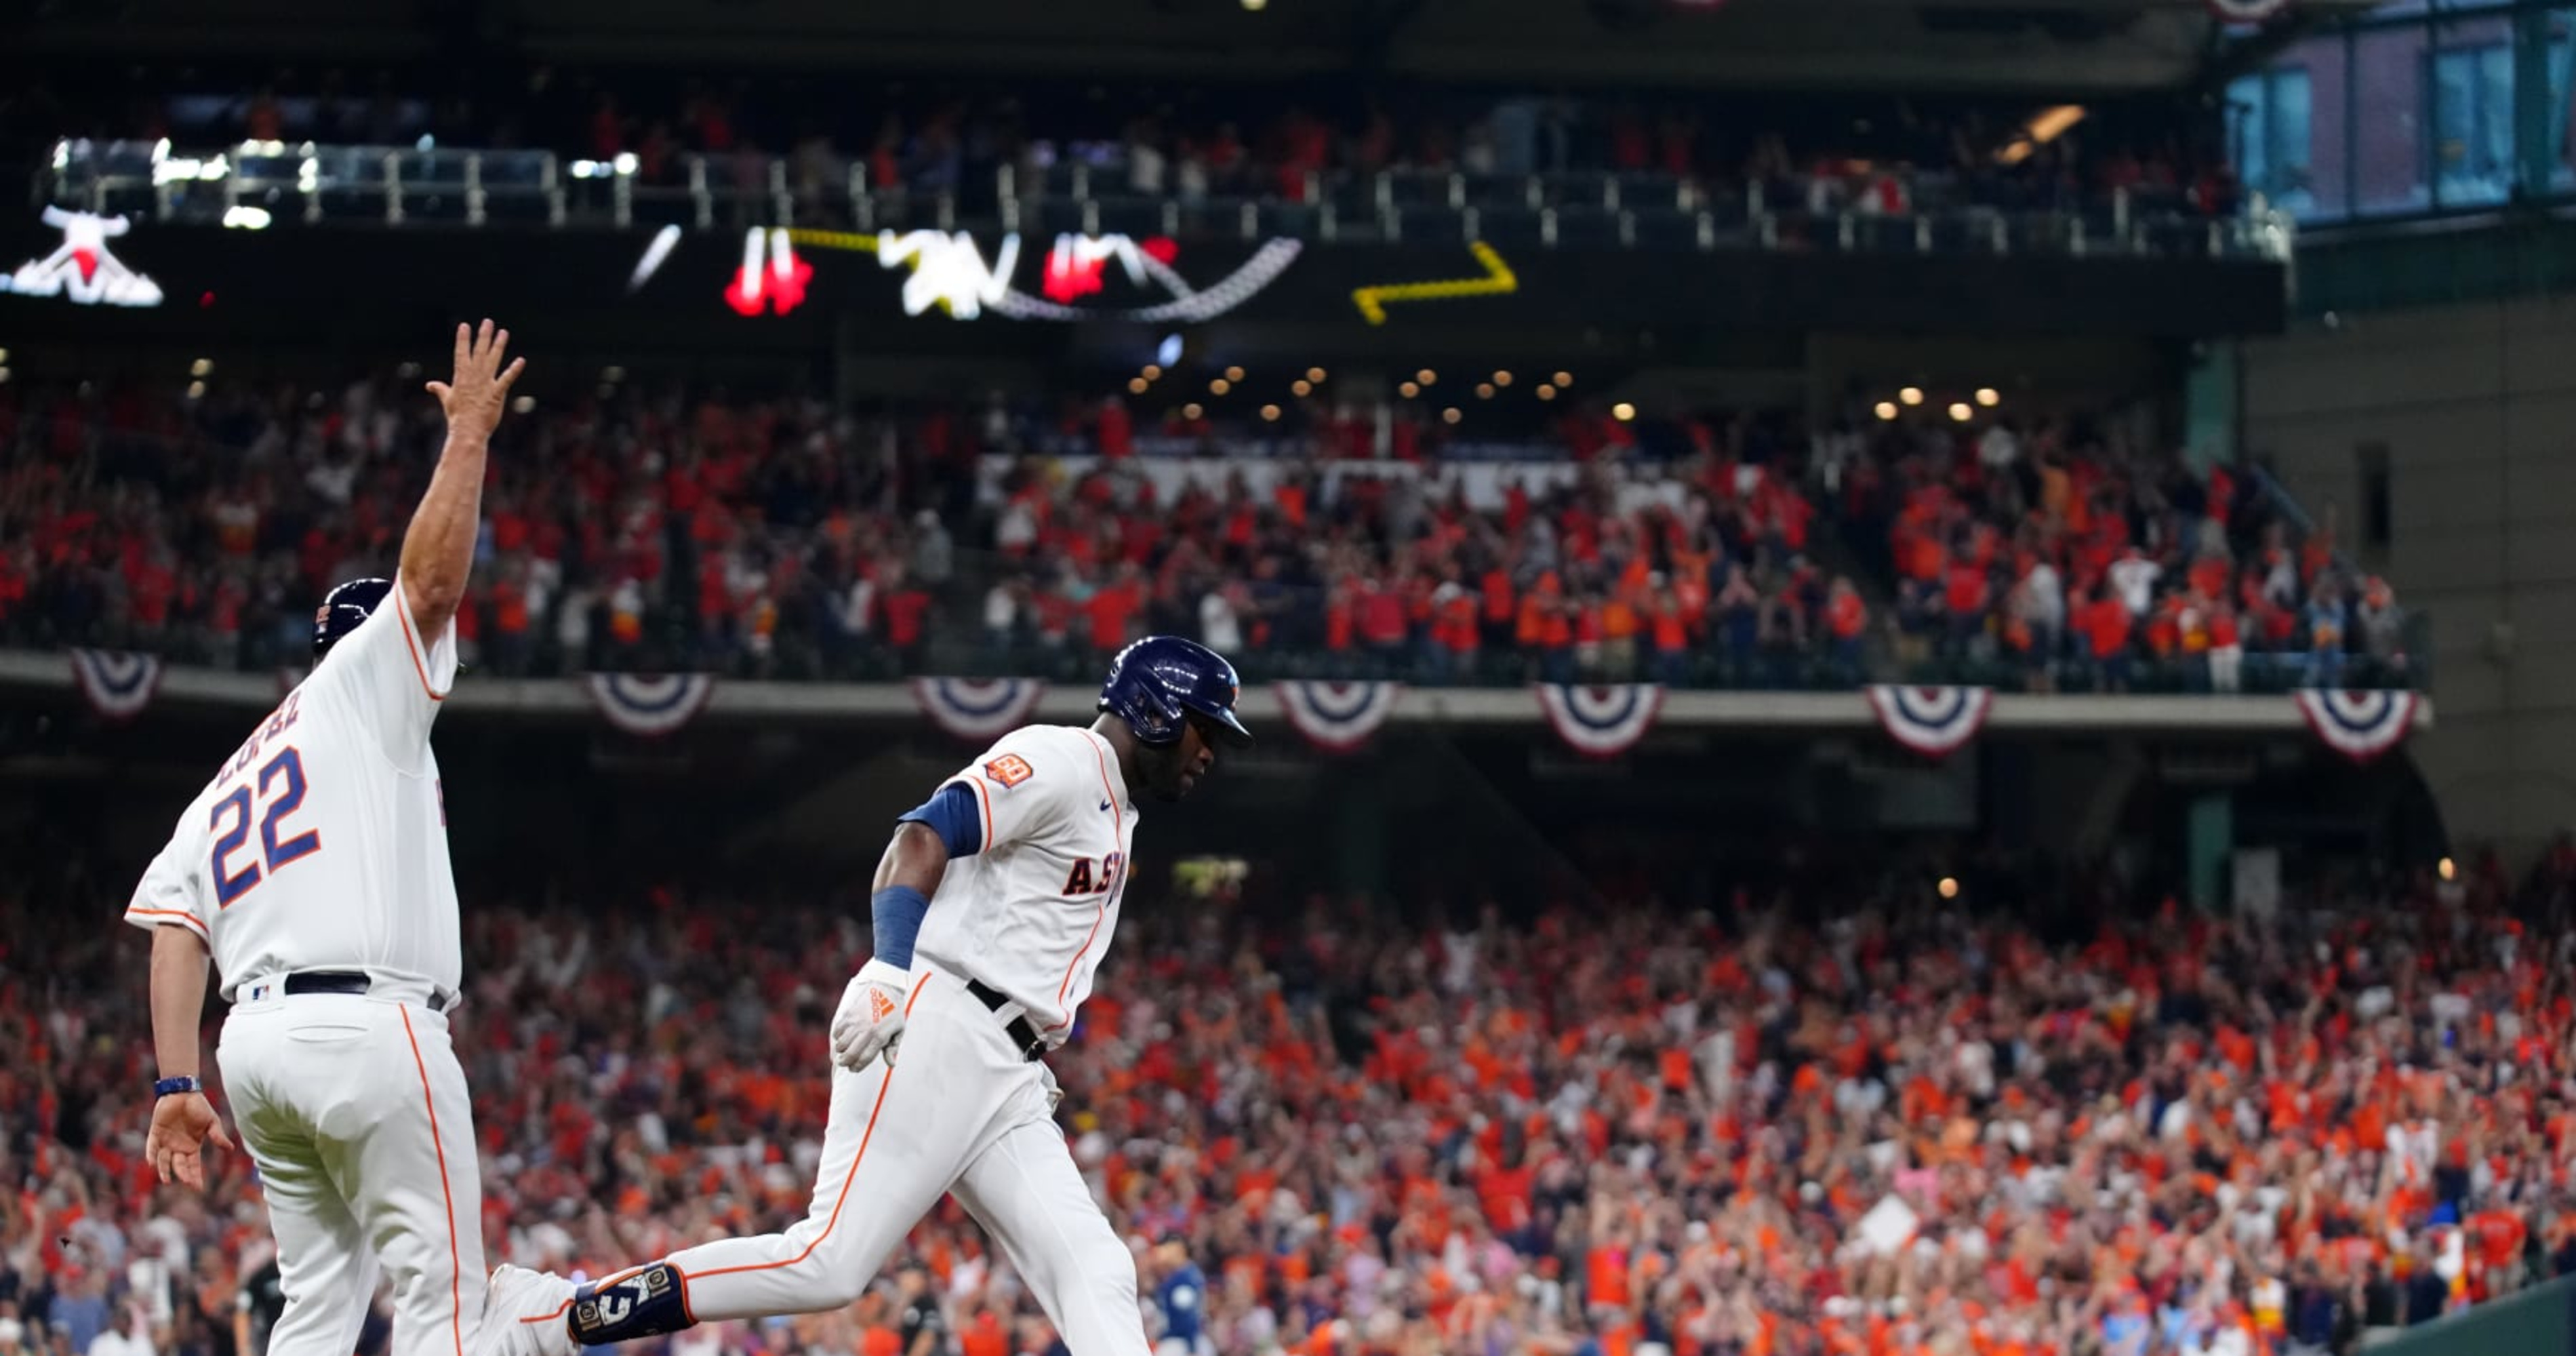 MLB Playoff Picture 2022: Hot Takes and Top Storylines for October 13 Schedule